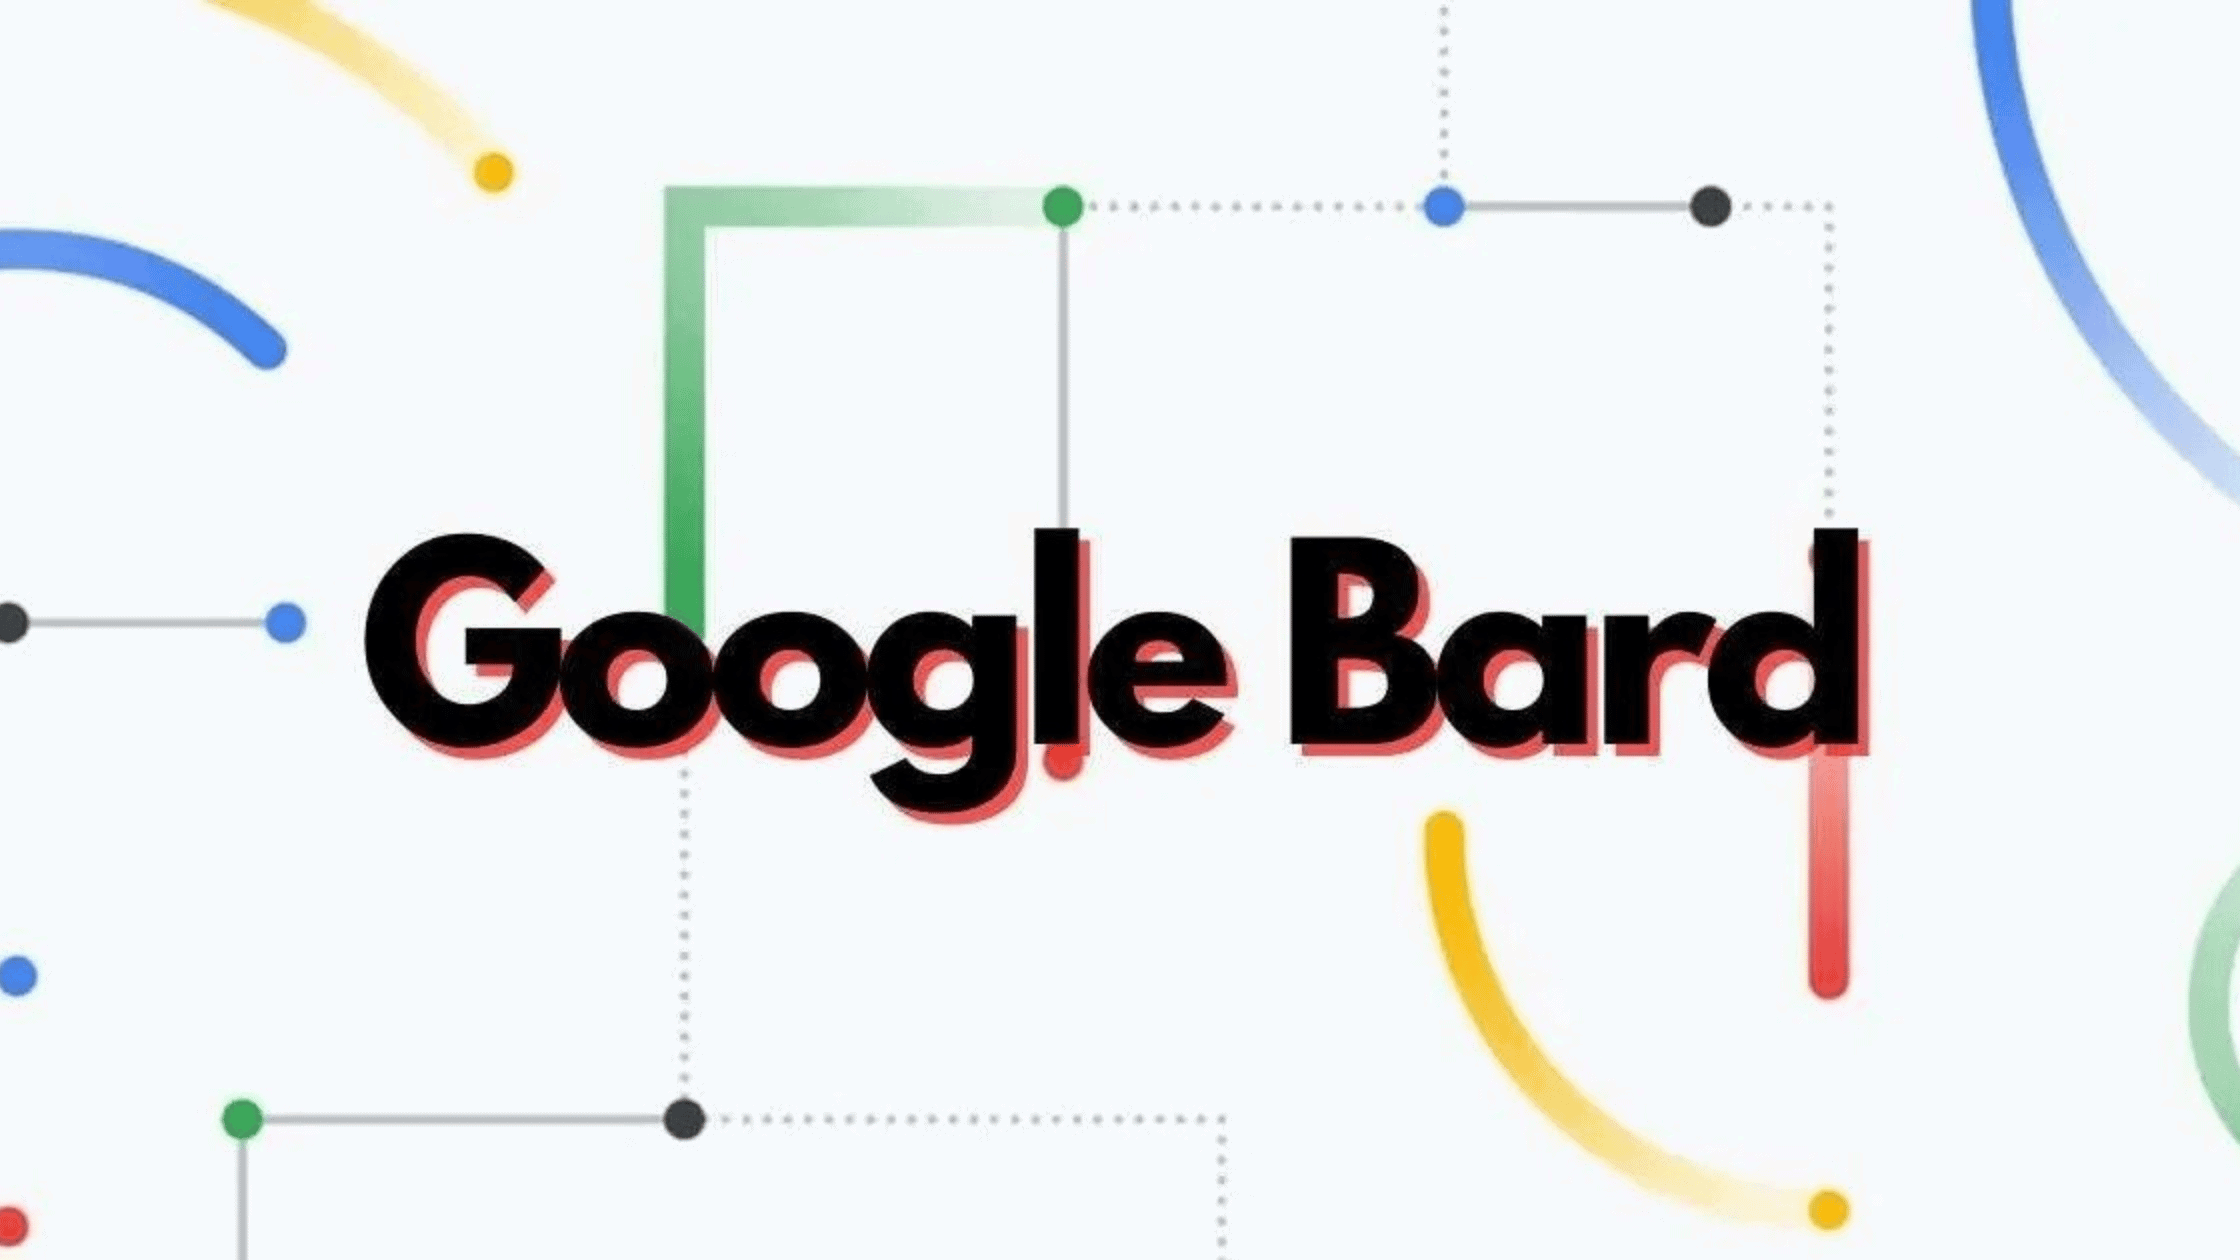 Google Bard integrates Gmail, Docs, Drive & more: Check out these cool new features